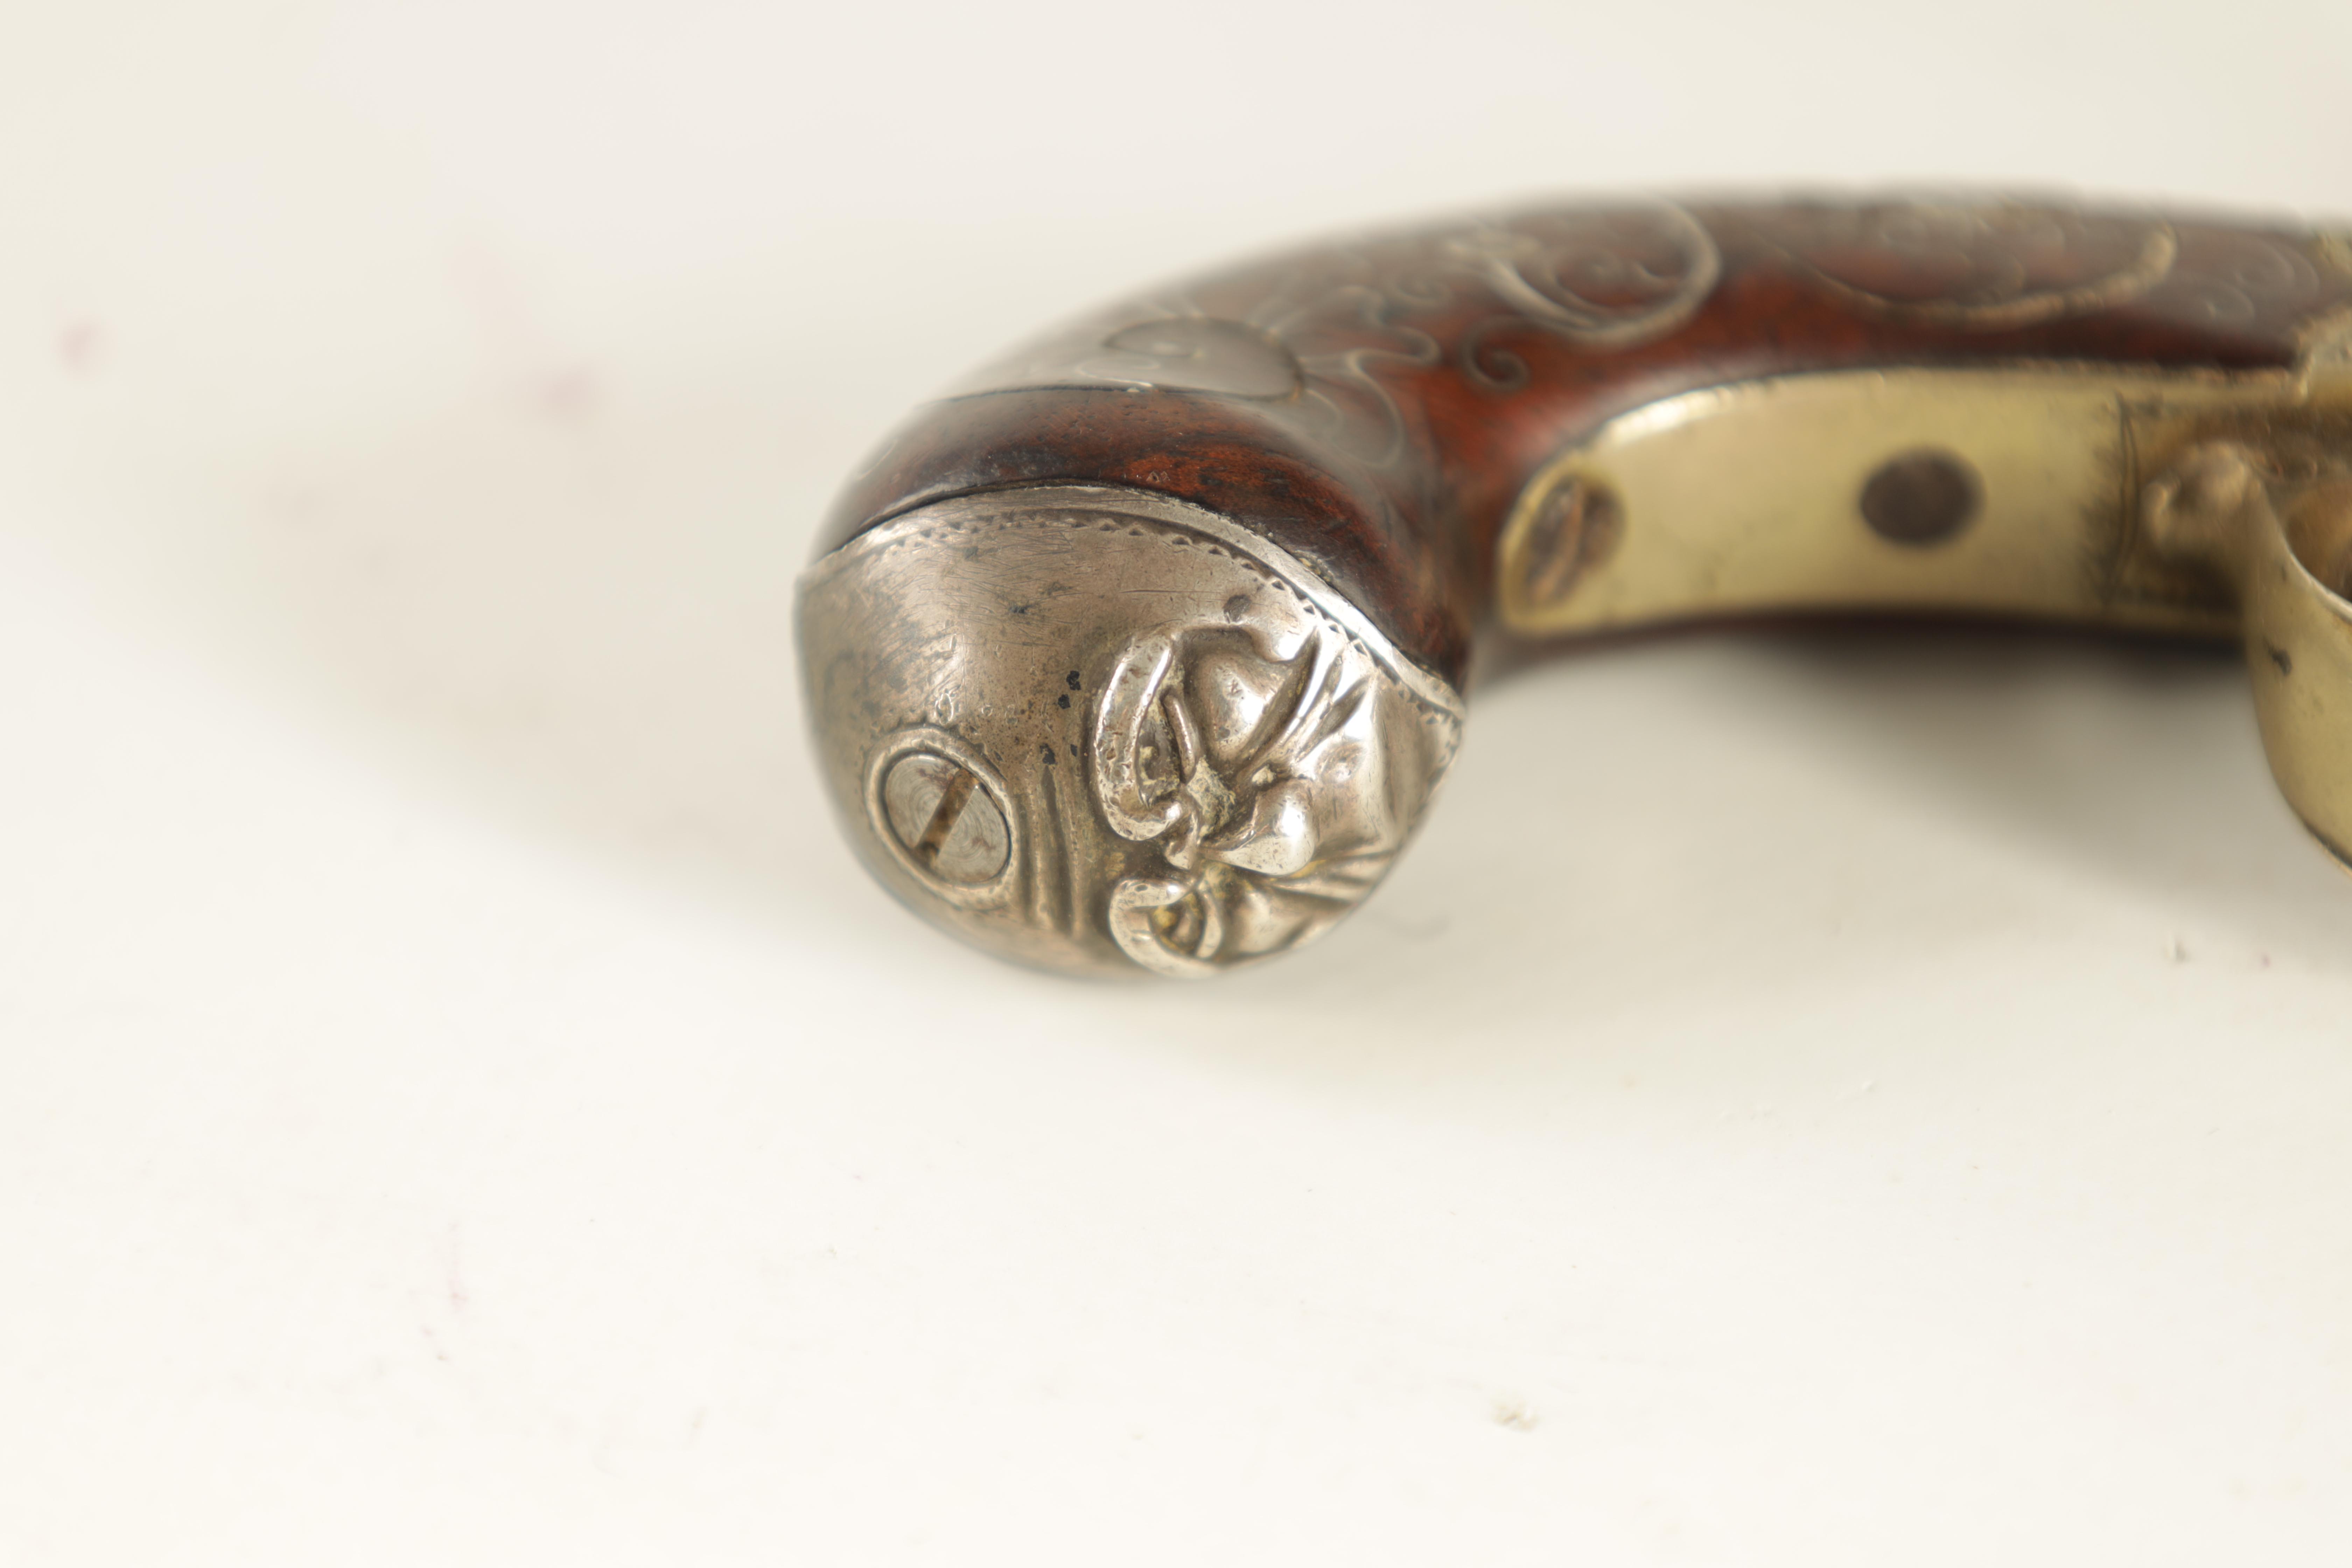 HUGH VERNCOMB, BRISTOL A GEORGE III PACTONG AND WALNUT FLINTLOCK MUFF PISTOL with a cannon-type - Image 4 of 9